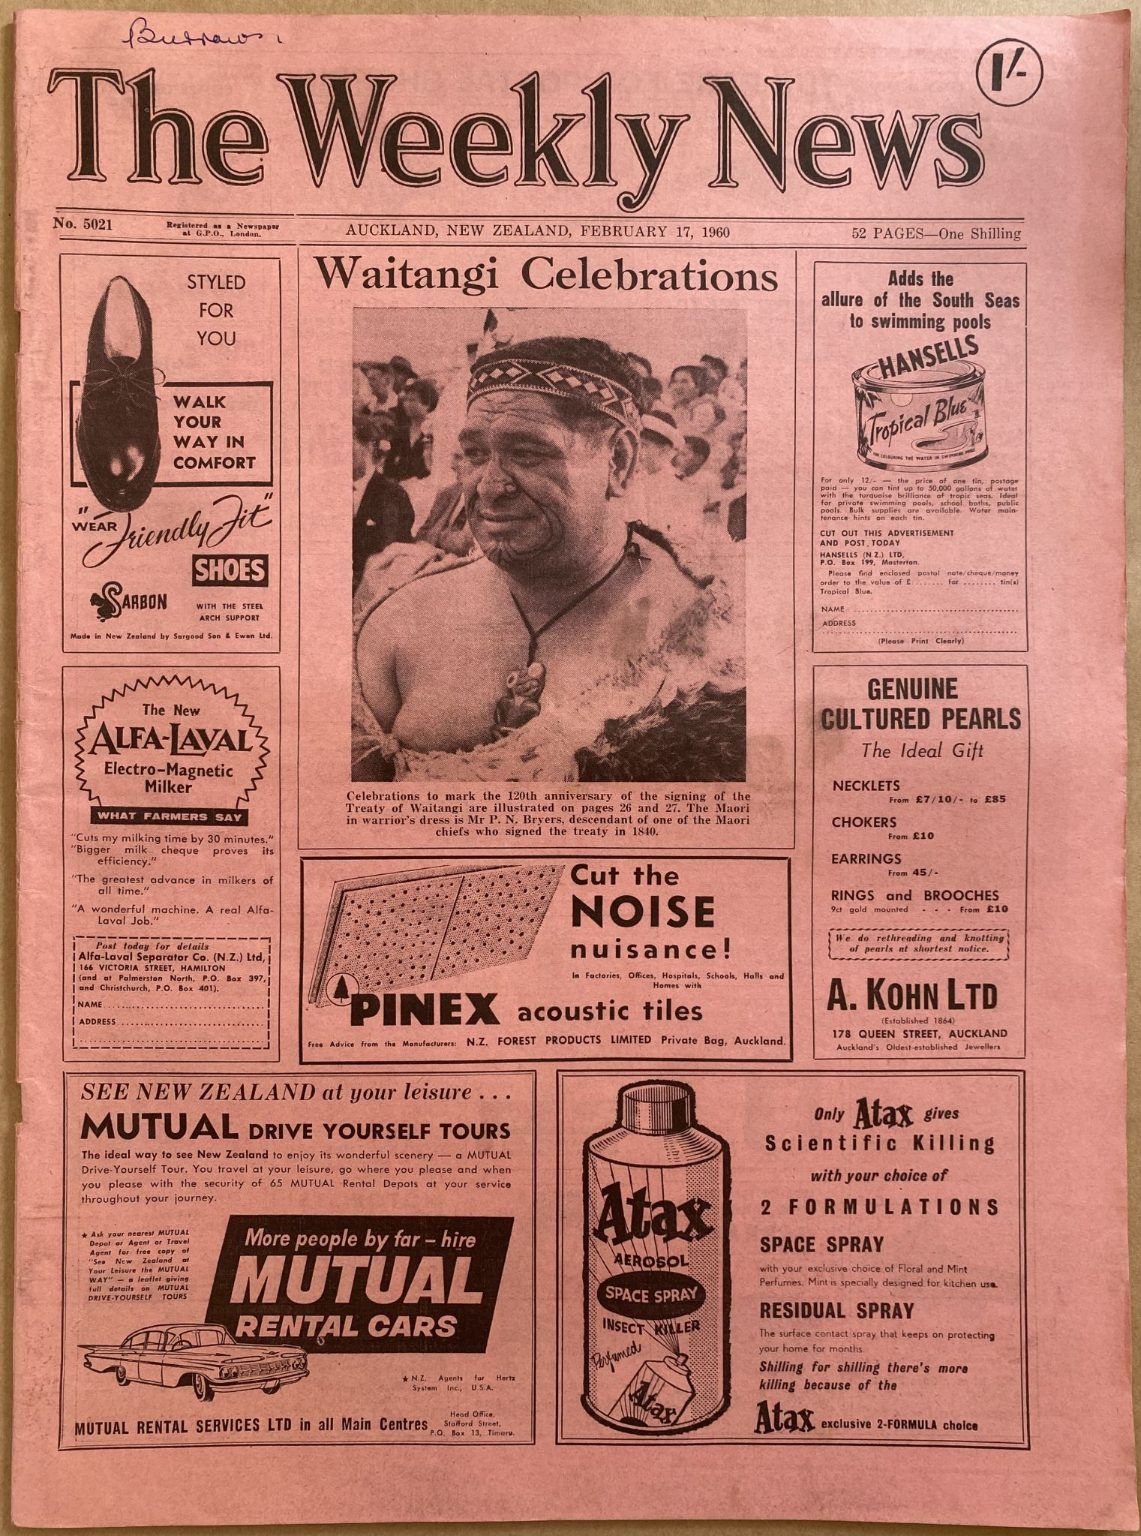 OLD NEWSPAPER: The Weekly News, No. 5021, 17 February 1960